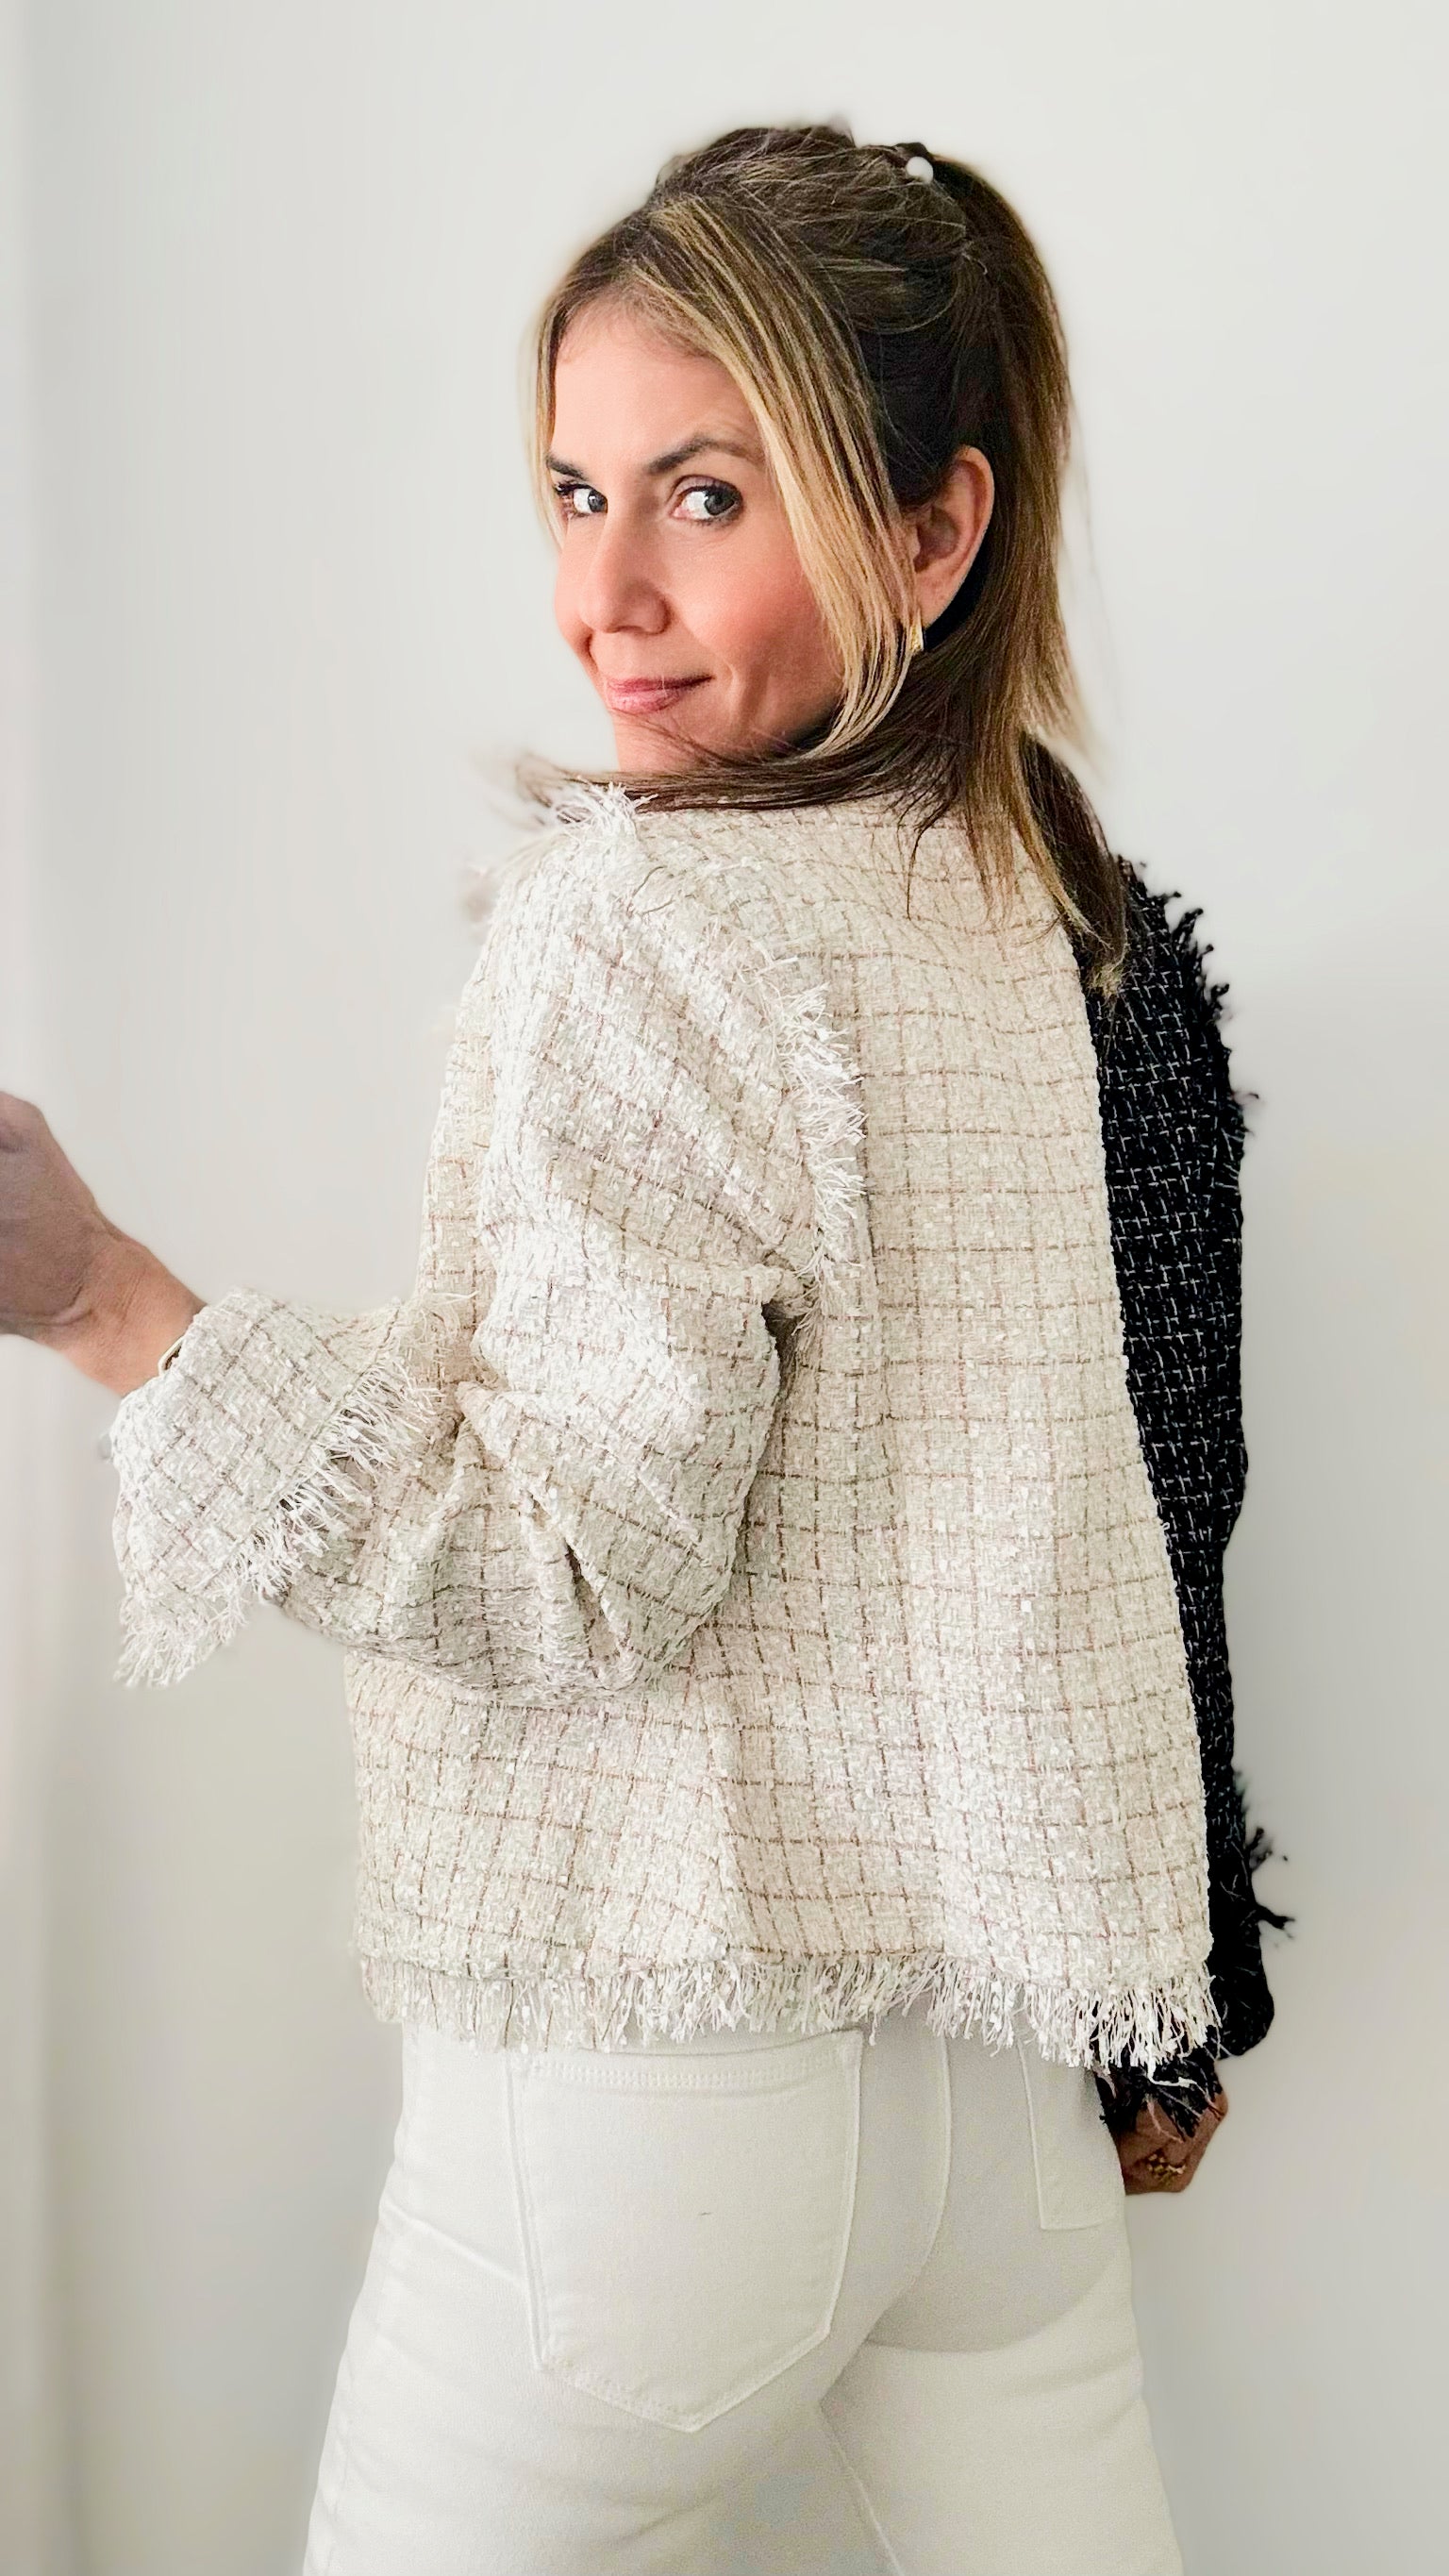 Cruella Contrast Tweed Jacket-160 Jackets-INA-Coastal Bloom Boutique, find the trendiest versions of the popular styles and looks Located in Indialantic, FL